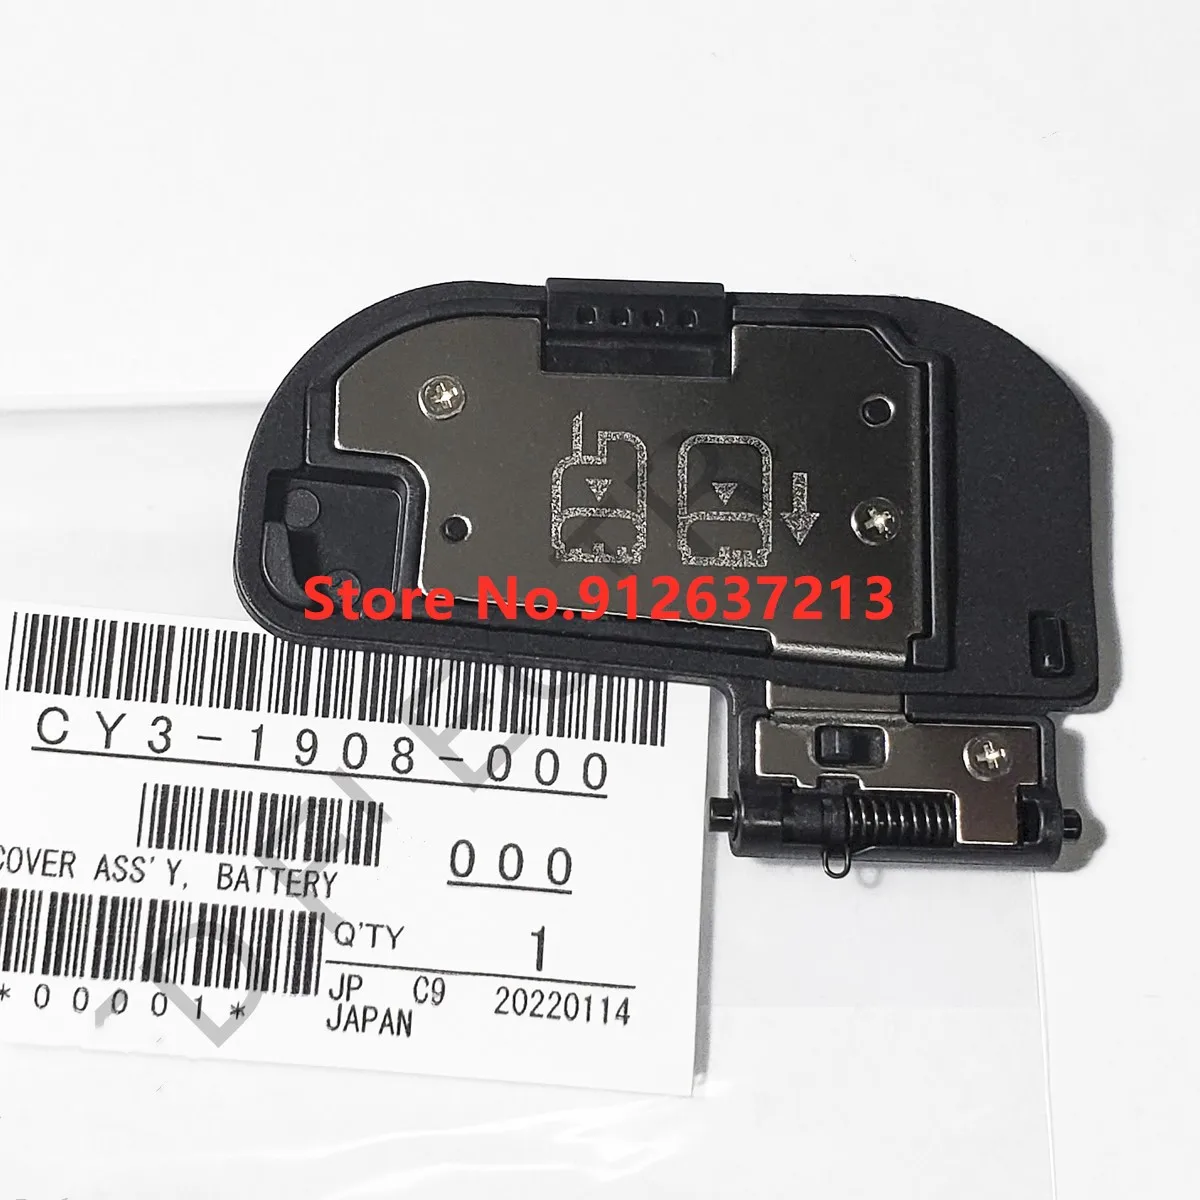 CM1-5008-000 CANON POWERSHOT A1000 IS BATTERY DOOR COVER UNIT LID CHAMBER 